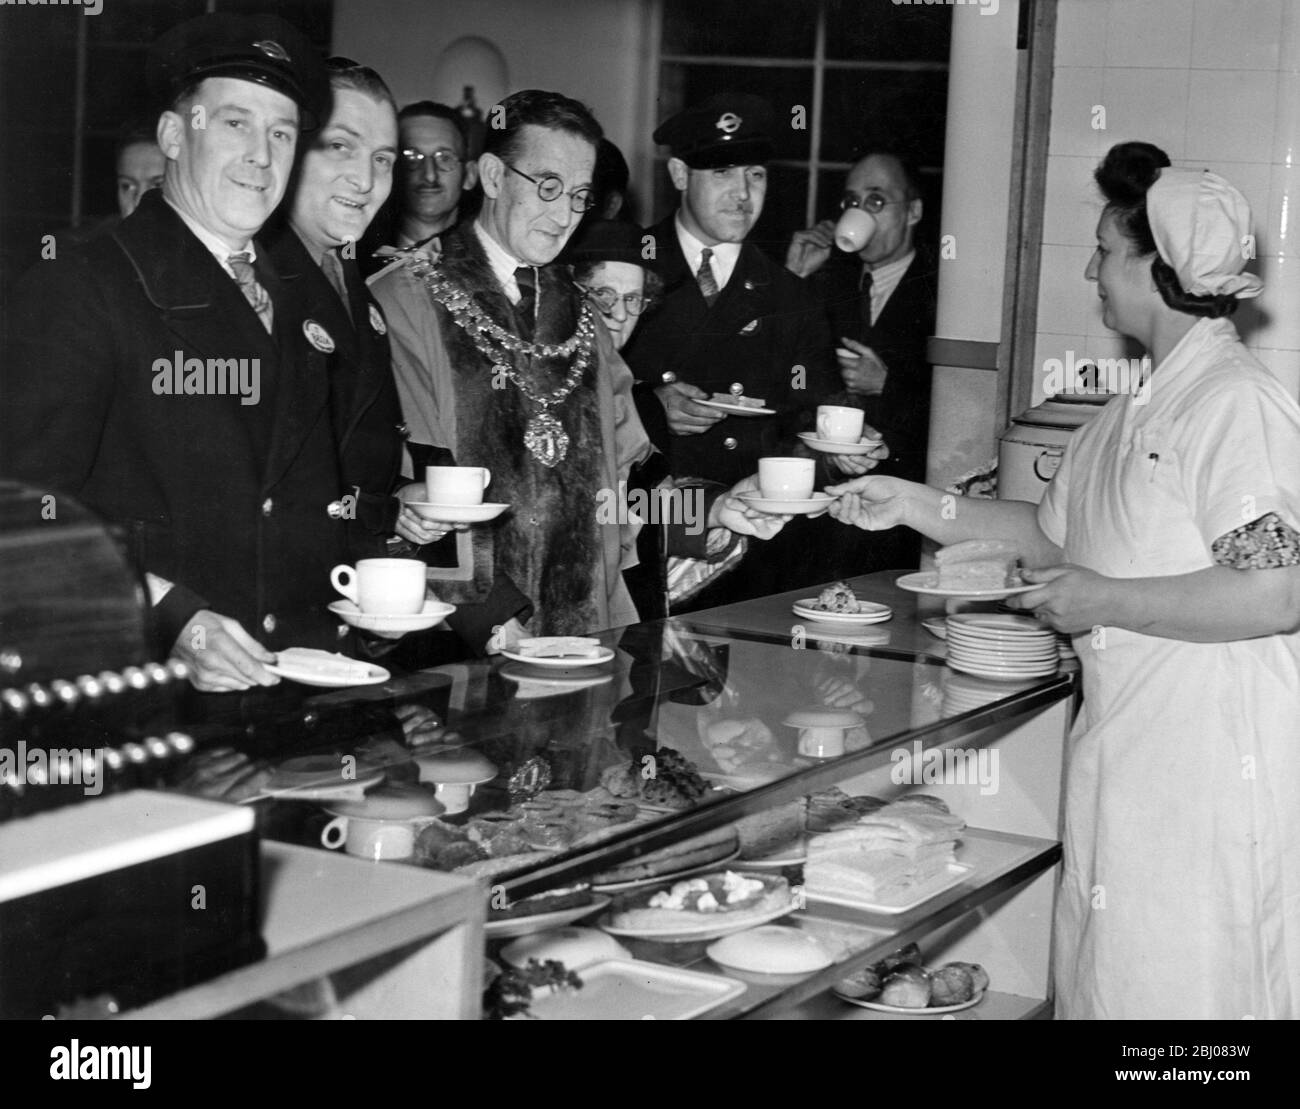 1000 London Transport men attached to the West Ham Trolleybus Depot have a new canteen which replaced the building which was bombed by a flying bomb. Alderman F.A. Warner was present to receive the first cup of tea. - London, England. - 29 October 1947 Stock Photo